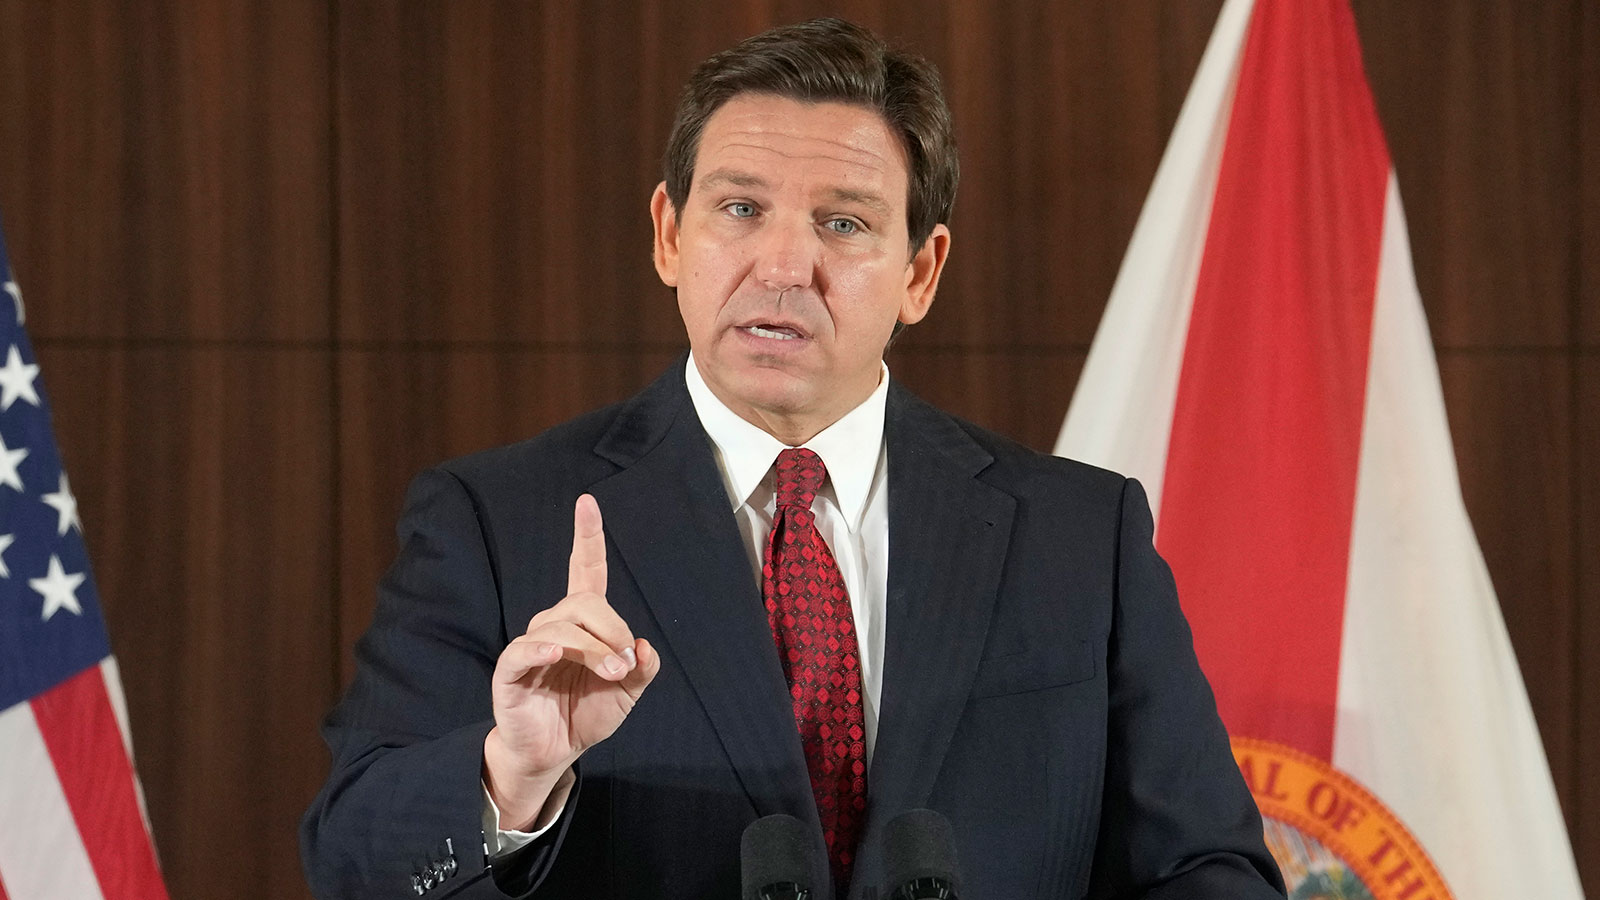 Ron DeSantis wants to make it easier to execute people